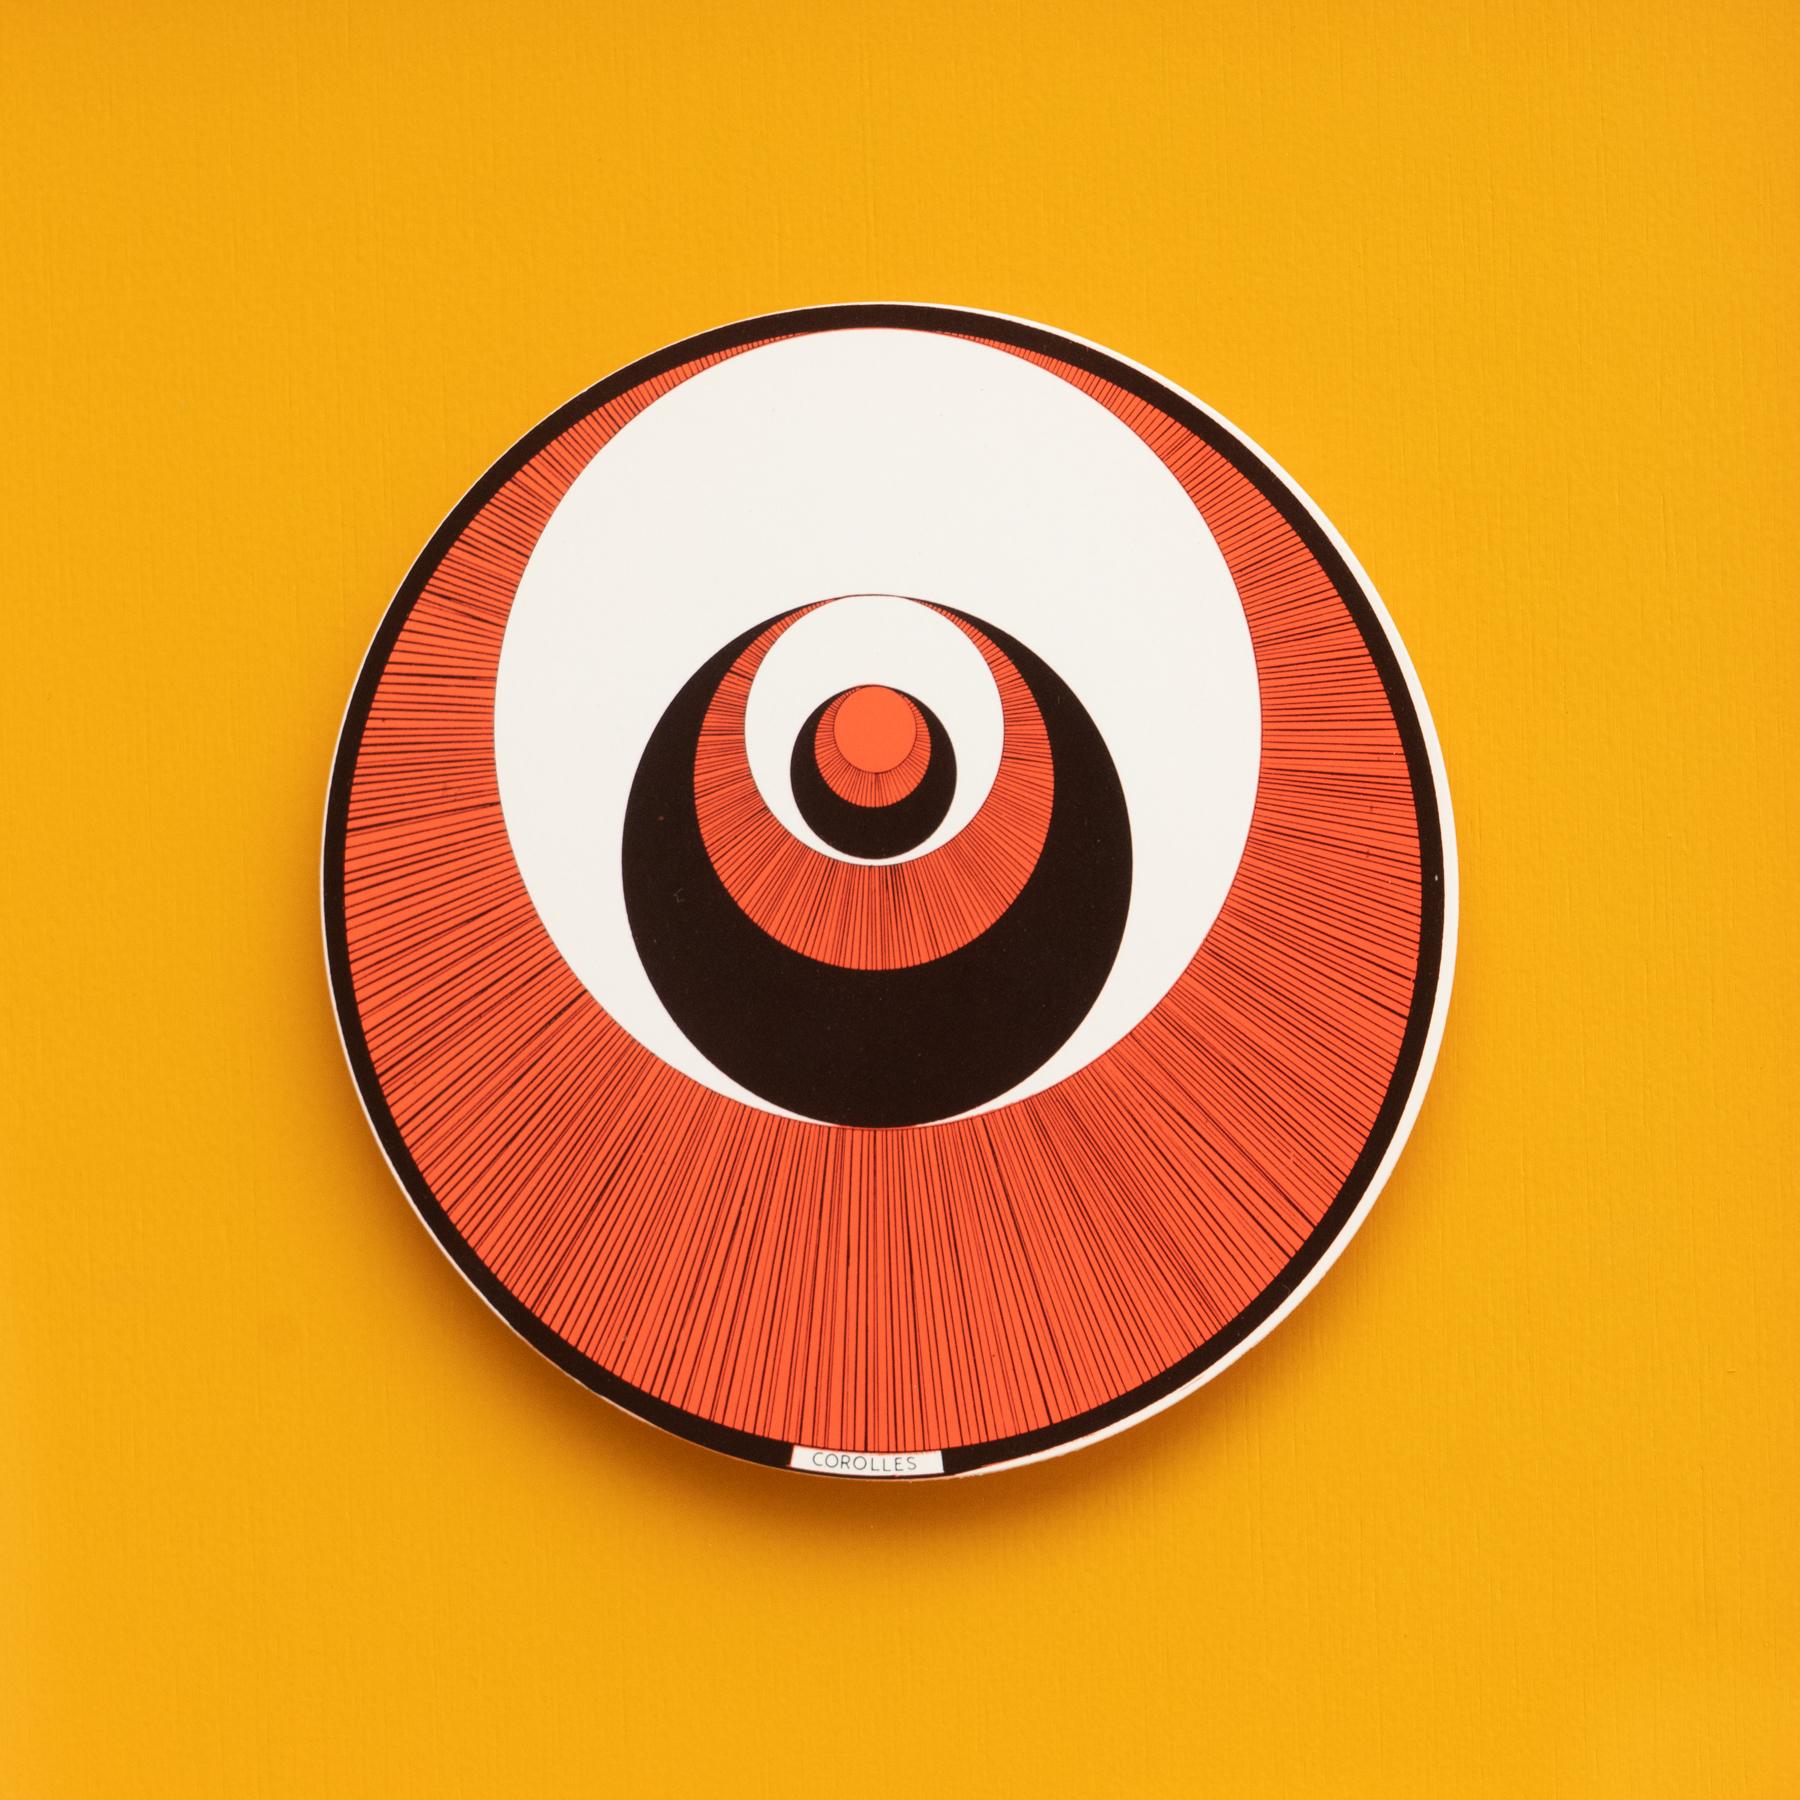 French Marcel Duchamp Corolles Rotorelief Konig Series 133, 1987 For Sale